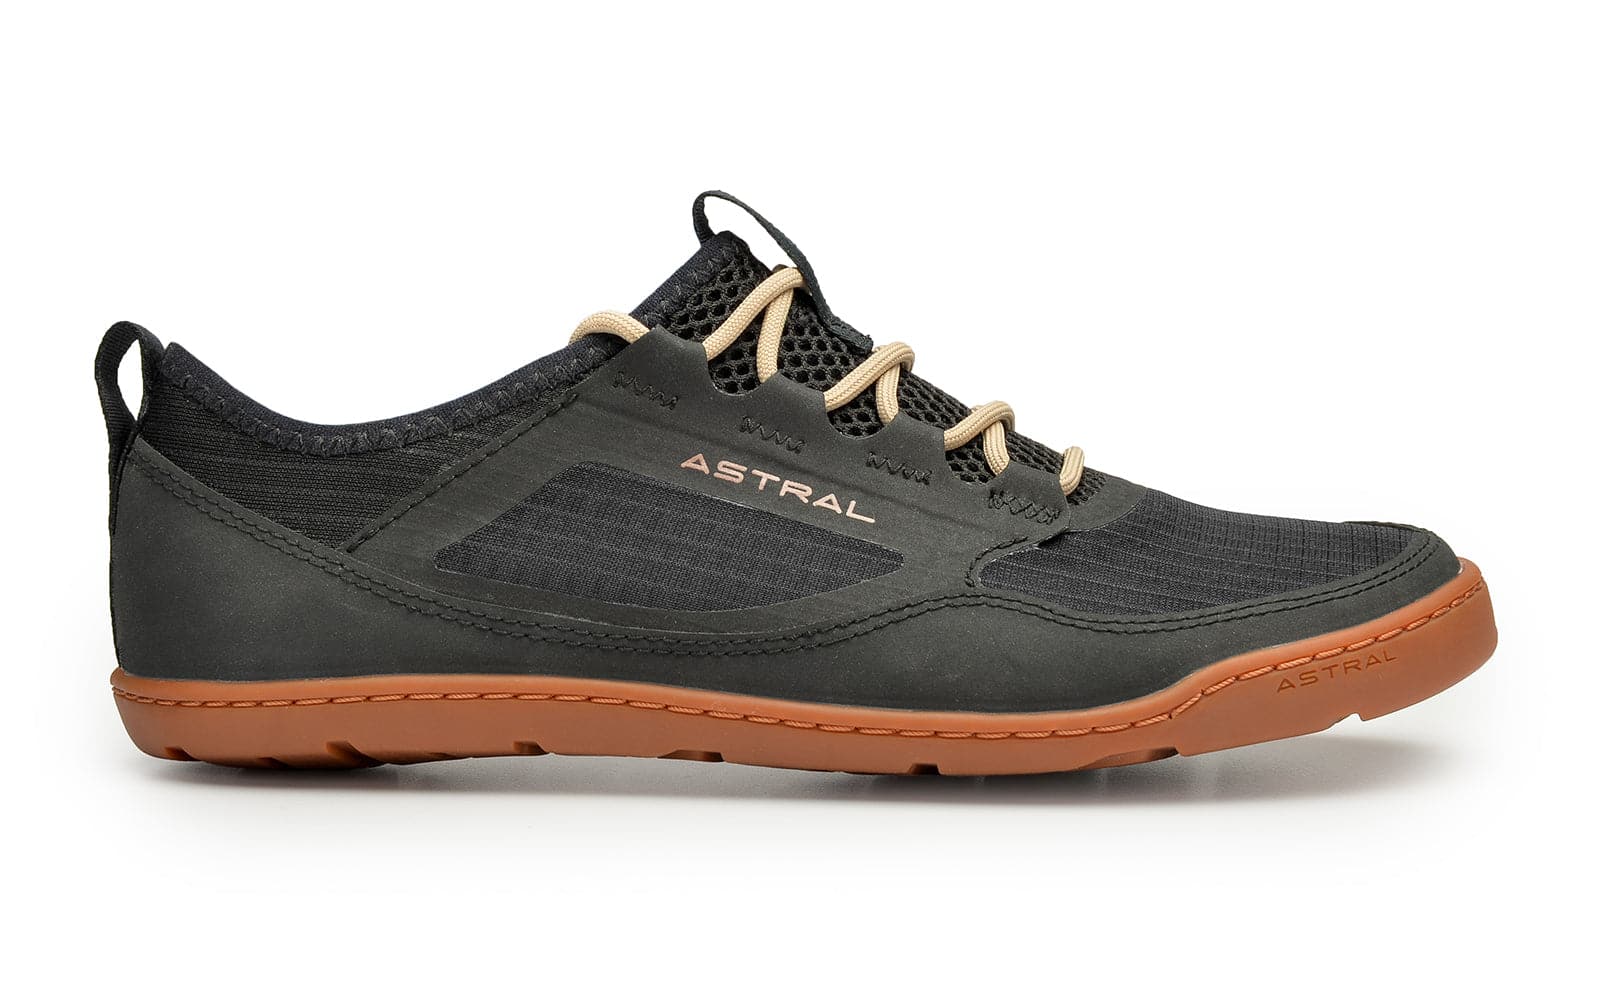 Featuring the Loyak AC - Women's women's footwear manufactured by Astral shown here from one angle.